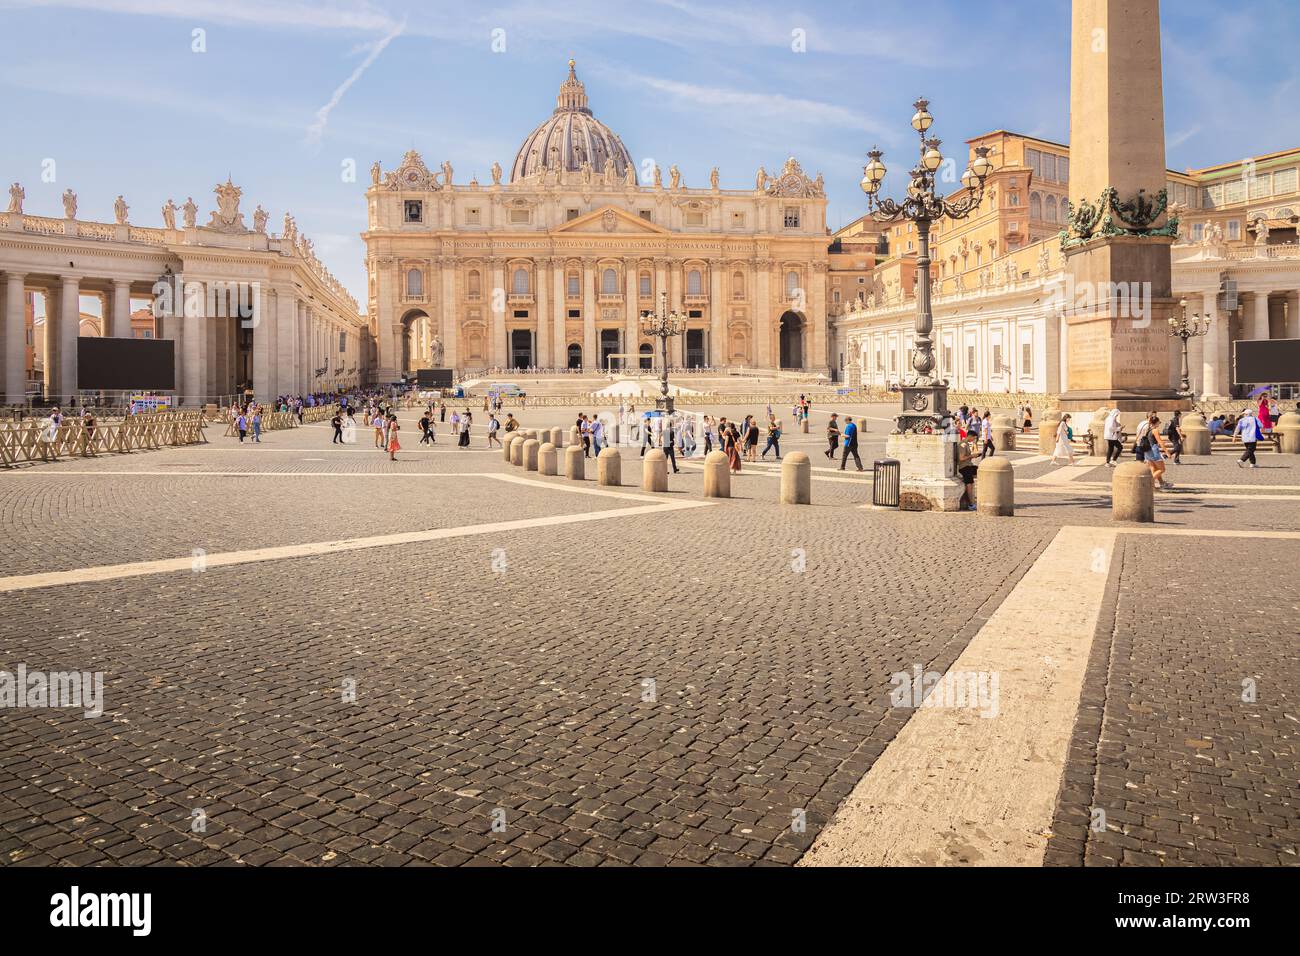 Vatican City - August 27, 2023: Tourists visit the historic Saint Peter's Square and basilica at the Vatican, home of the Roman Catholic Church, on a Stock Photo